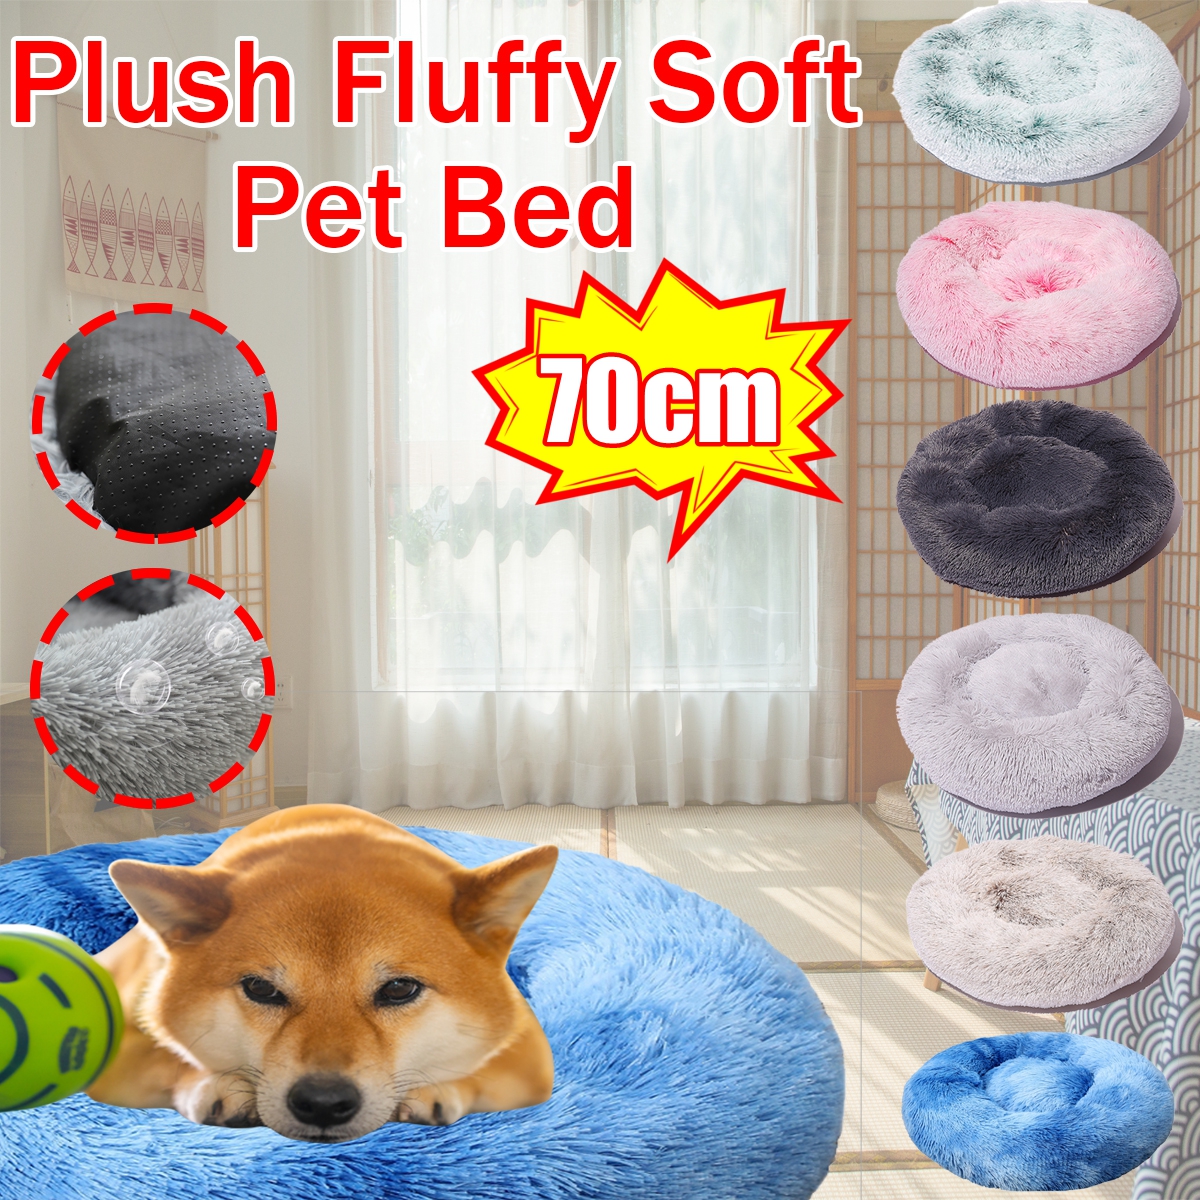 70cm-Plush-Fluffy-Soft-Pet-Bed-for-Cats--Dogs-Calming-Bed-Pad-Soft-Mat-Home-1808936-1